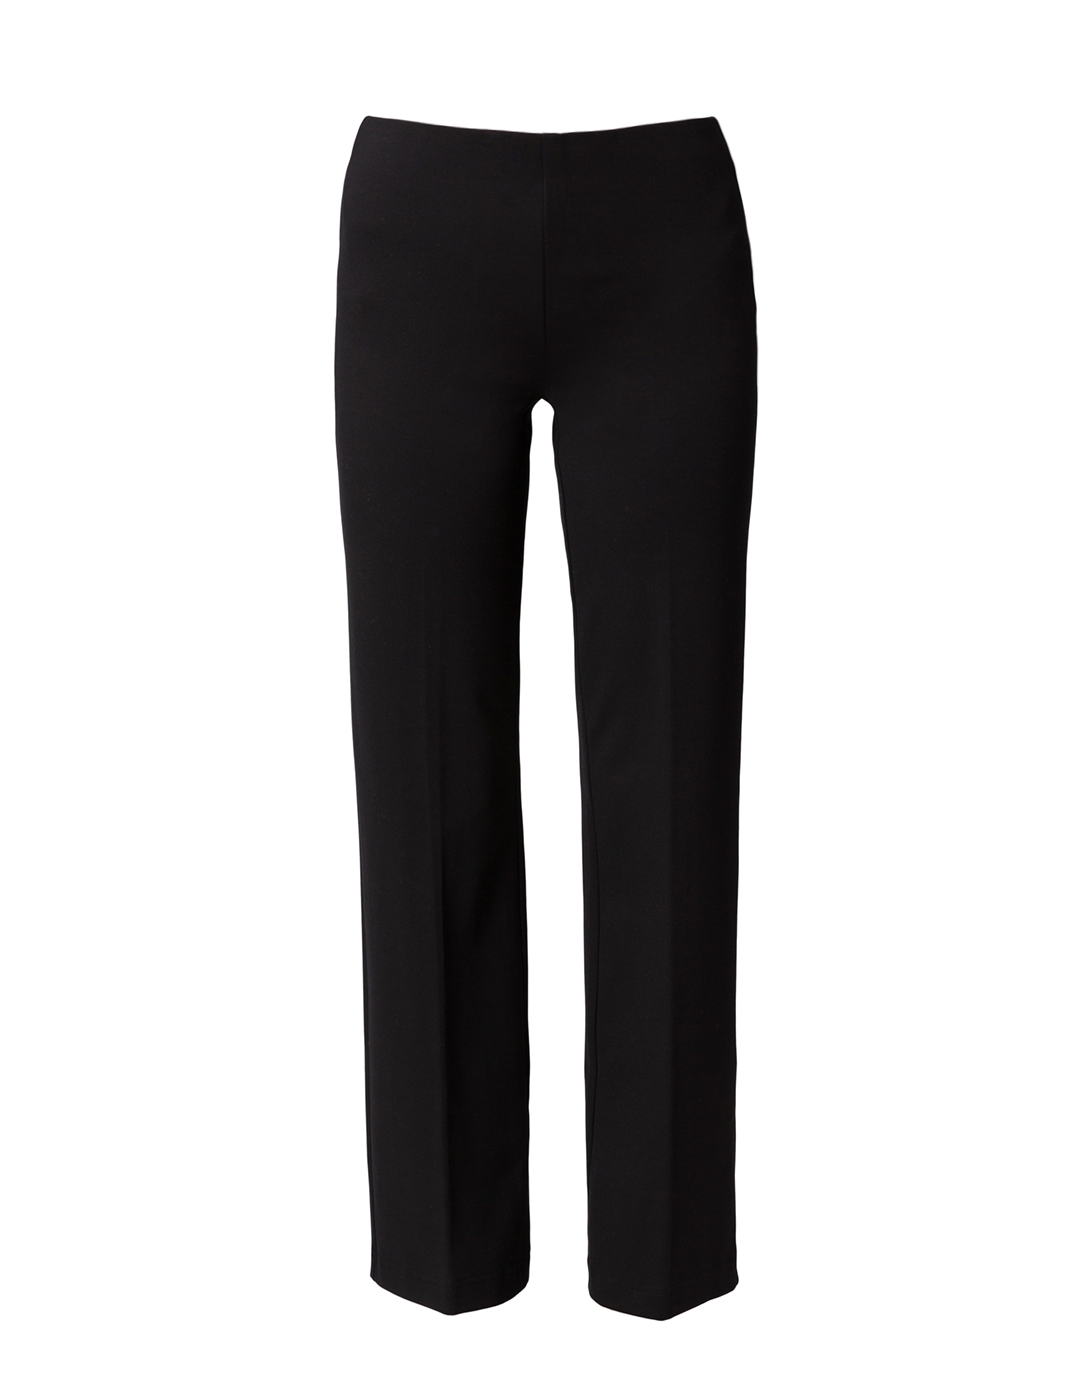 Buy the Eileen Fisher black ponte knit pull on pants women's L